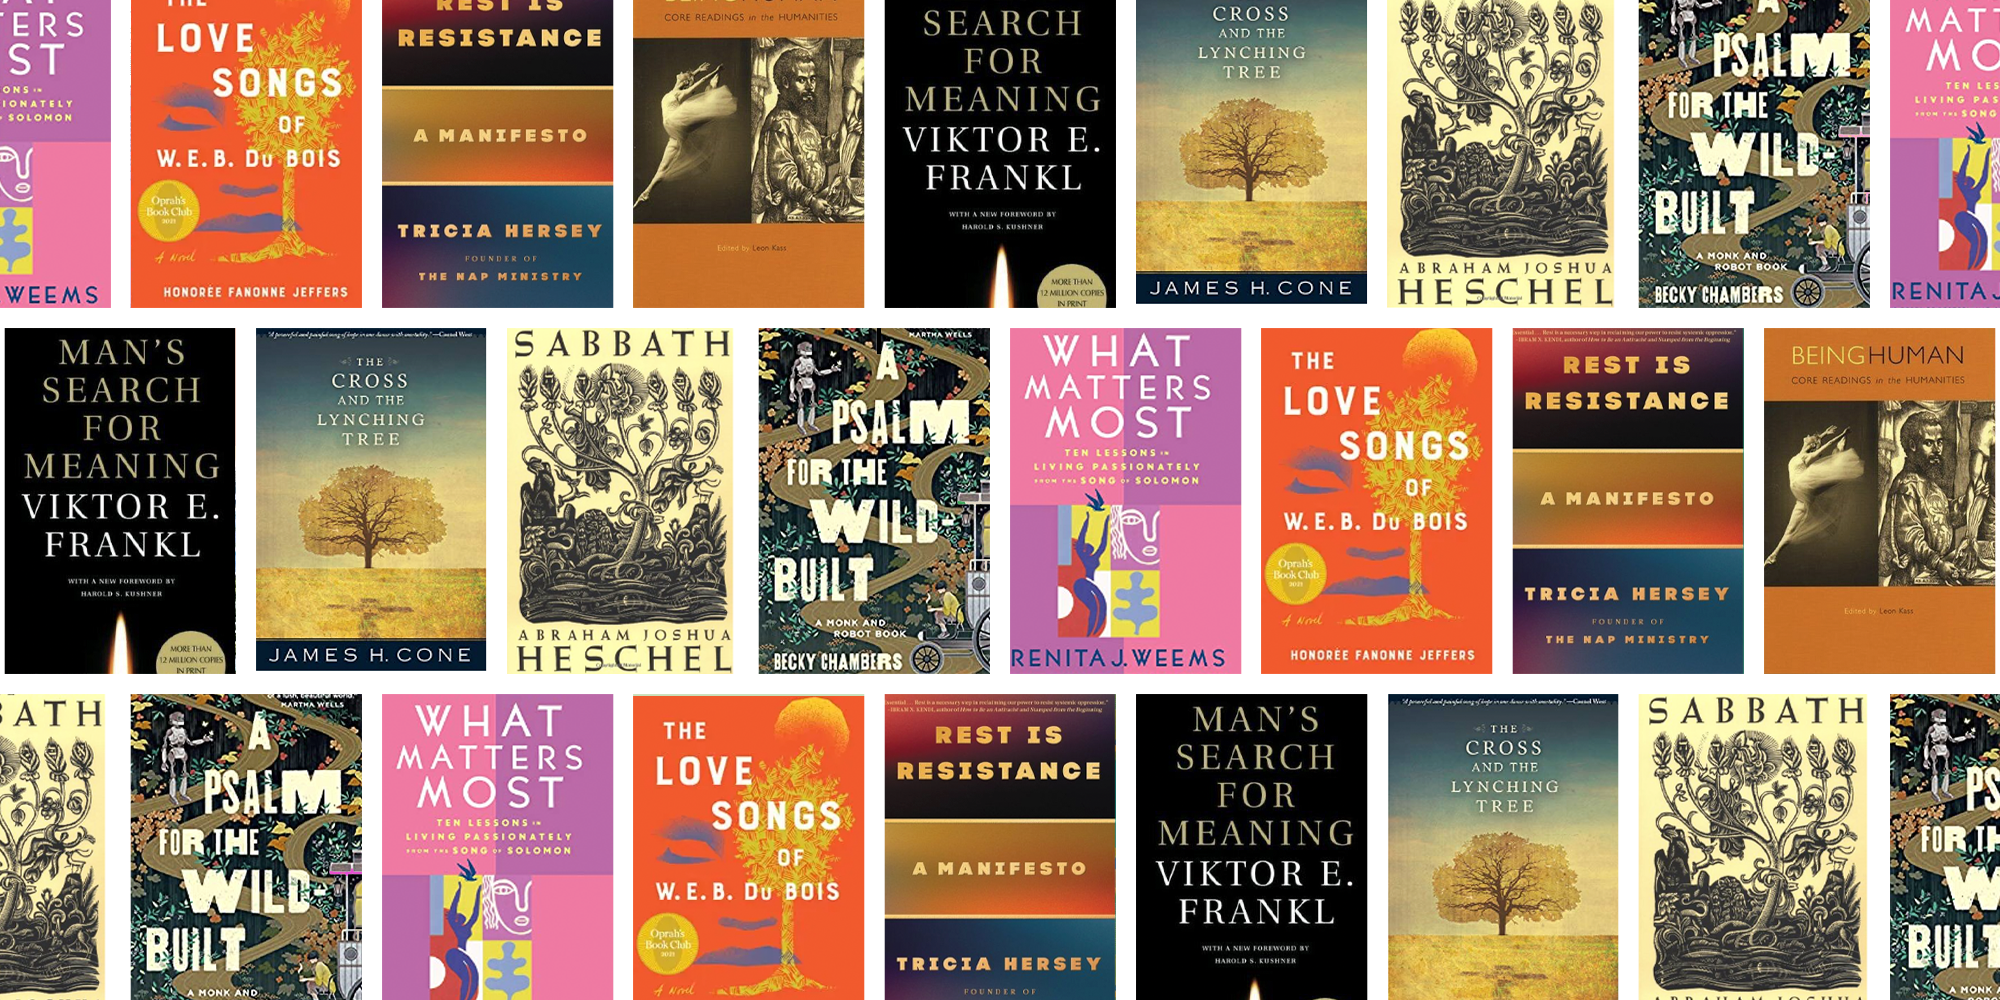 16 Best Spiritual Books of All Time, According to Experts